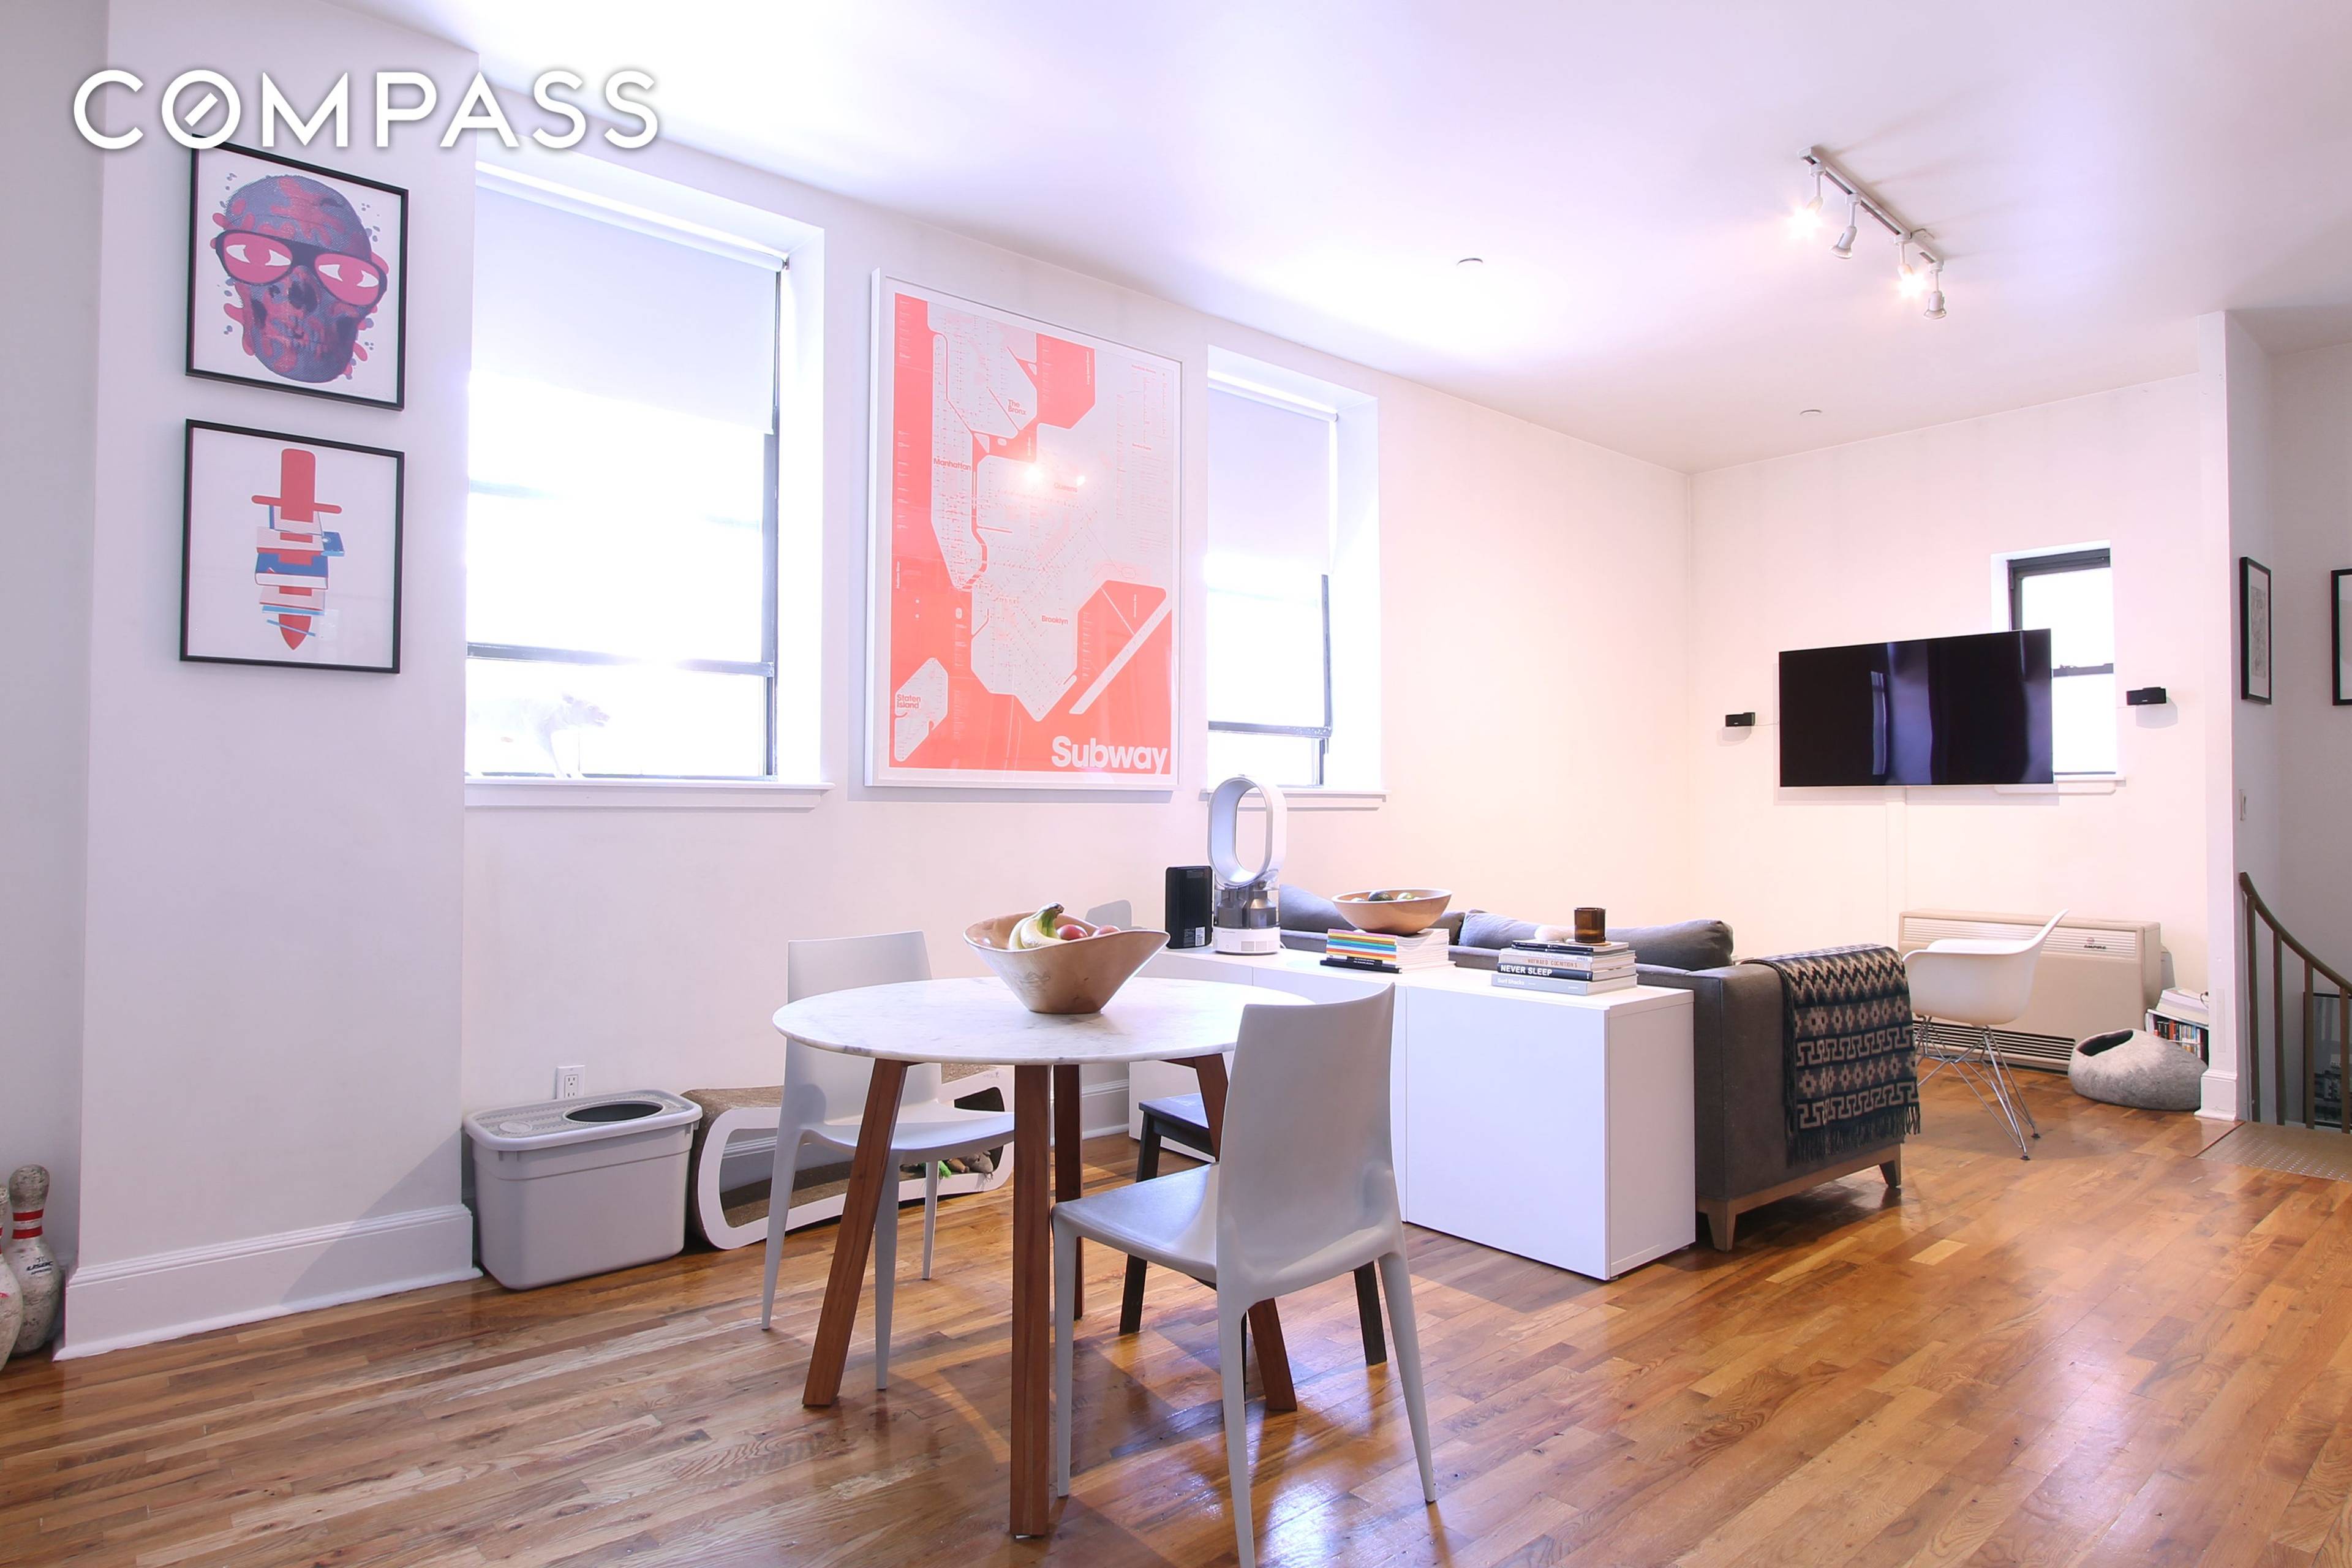 Williamsburg Duplex Large 1BD Duplex with Spiral Staircase, Stainless Steel Kitchen, Open Living Area, in a Pet Friendly Elevator Building with Laundry Room An amazing duplex home awaits you in ...